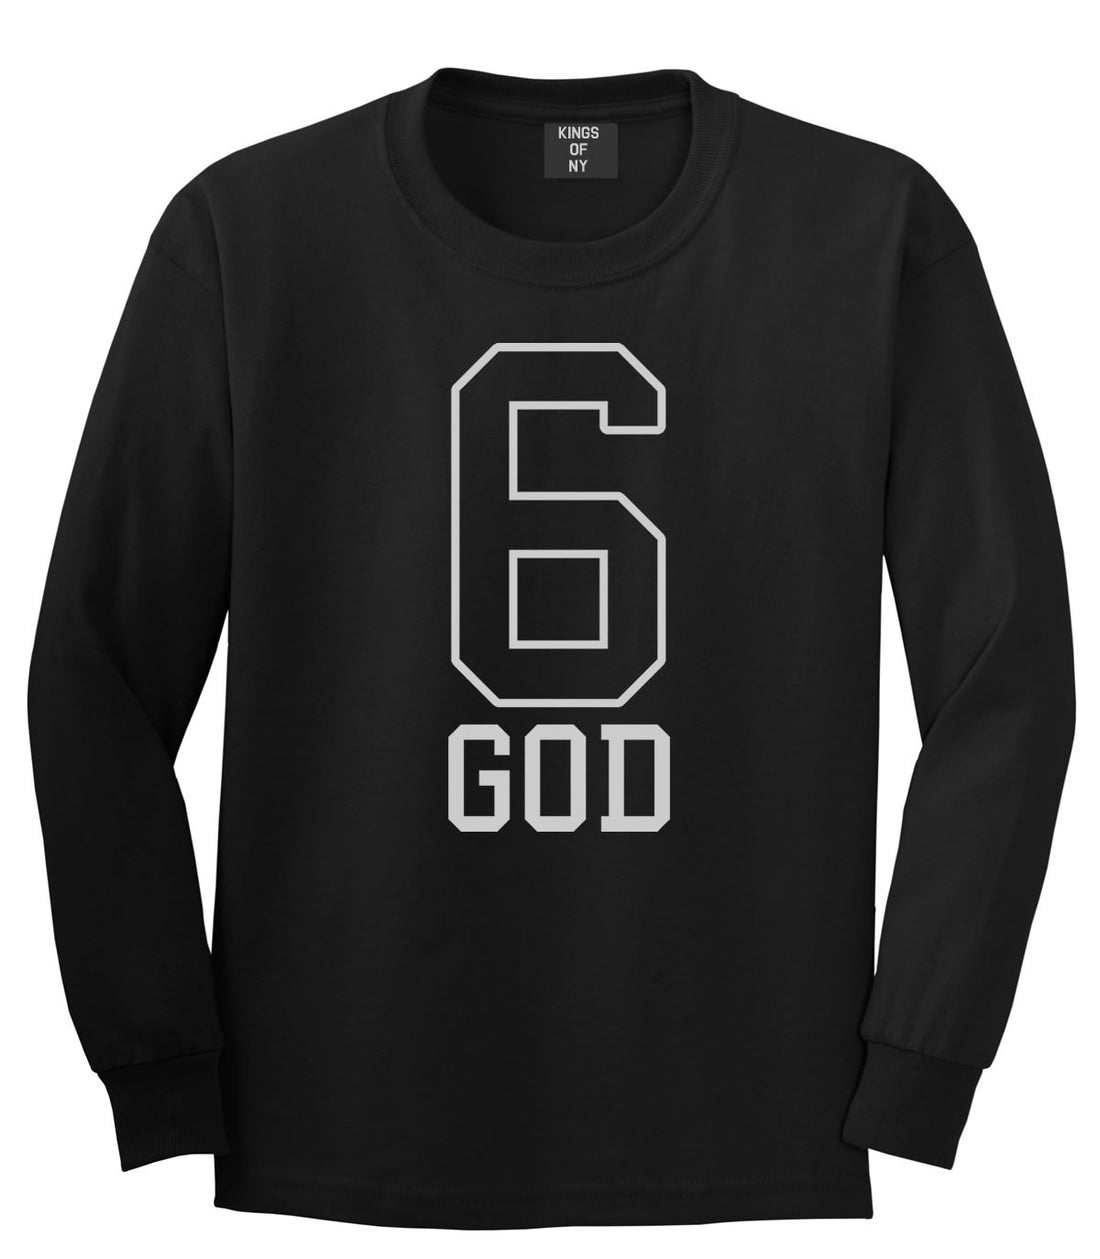 Six 6 God Long Sleeve T-Shirt in Black By Kings Of NY